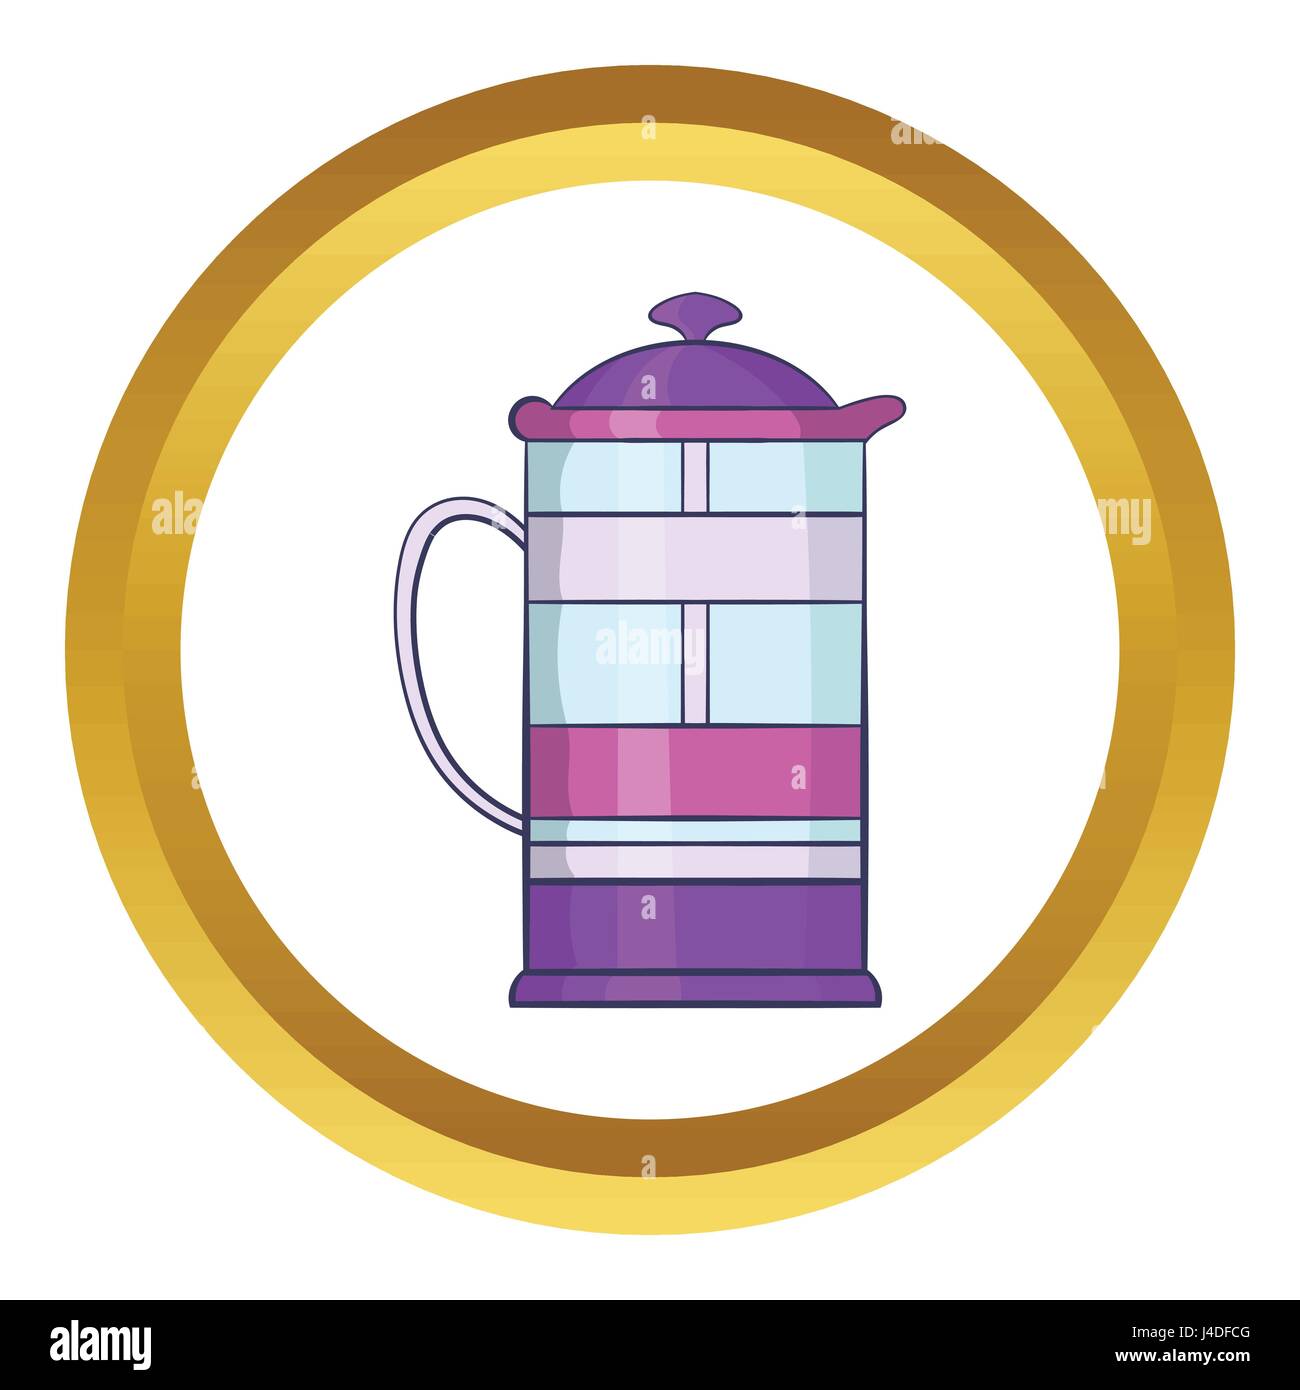 Coffee equipment Vectors & Illustrations for Free Download